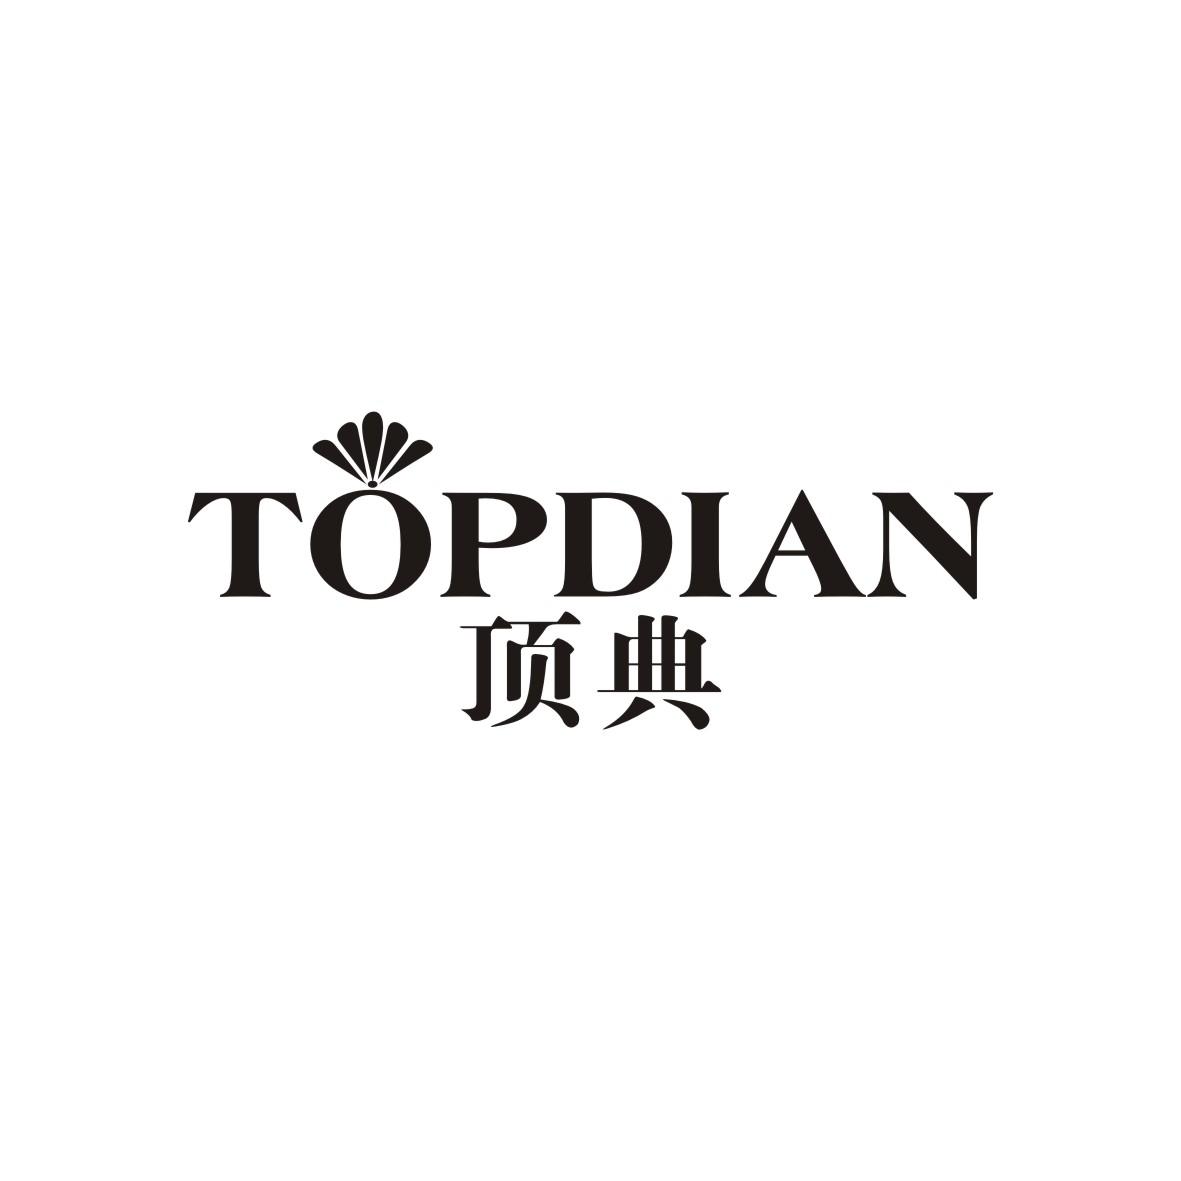  TOPDIAN